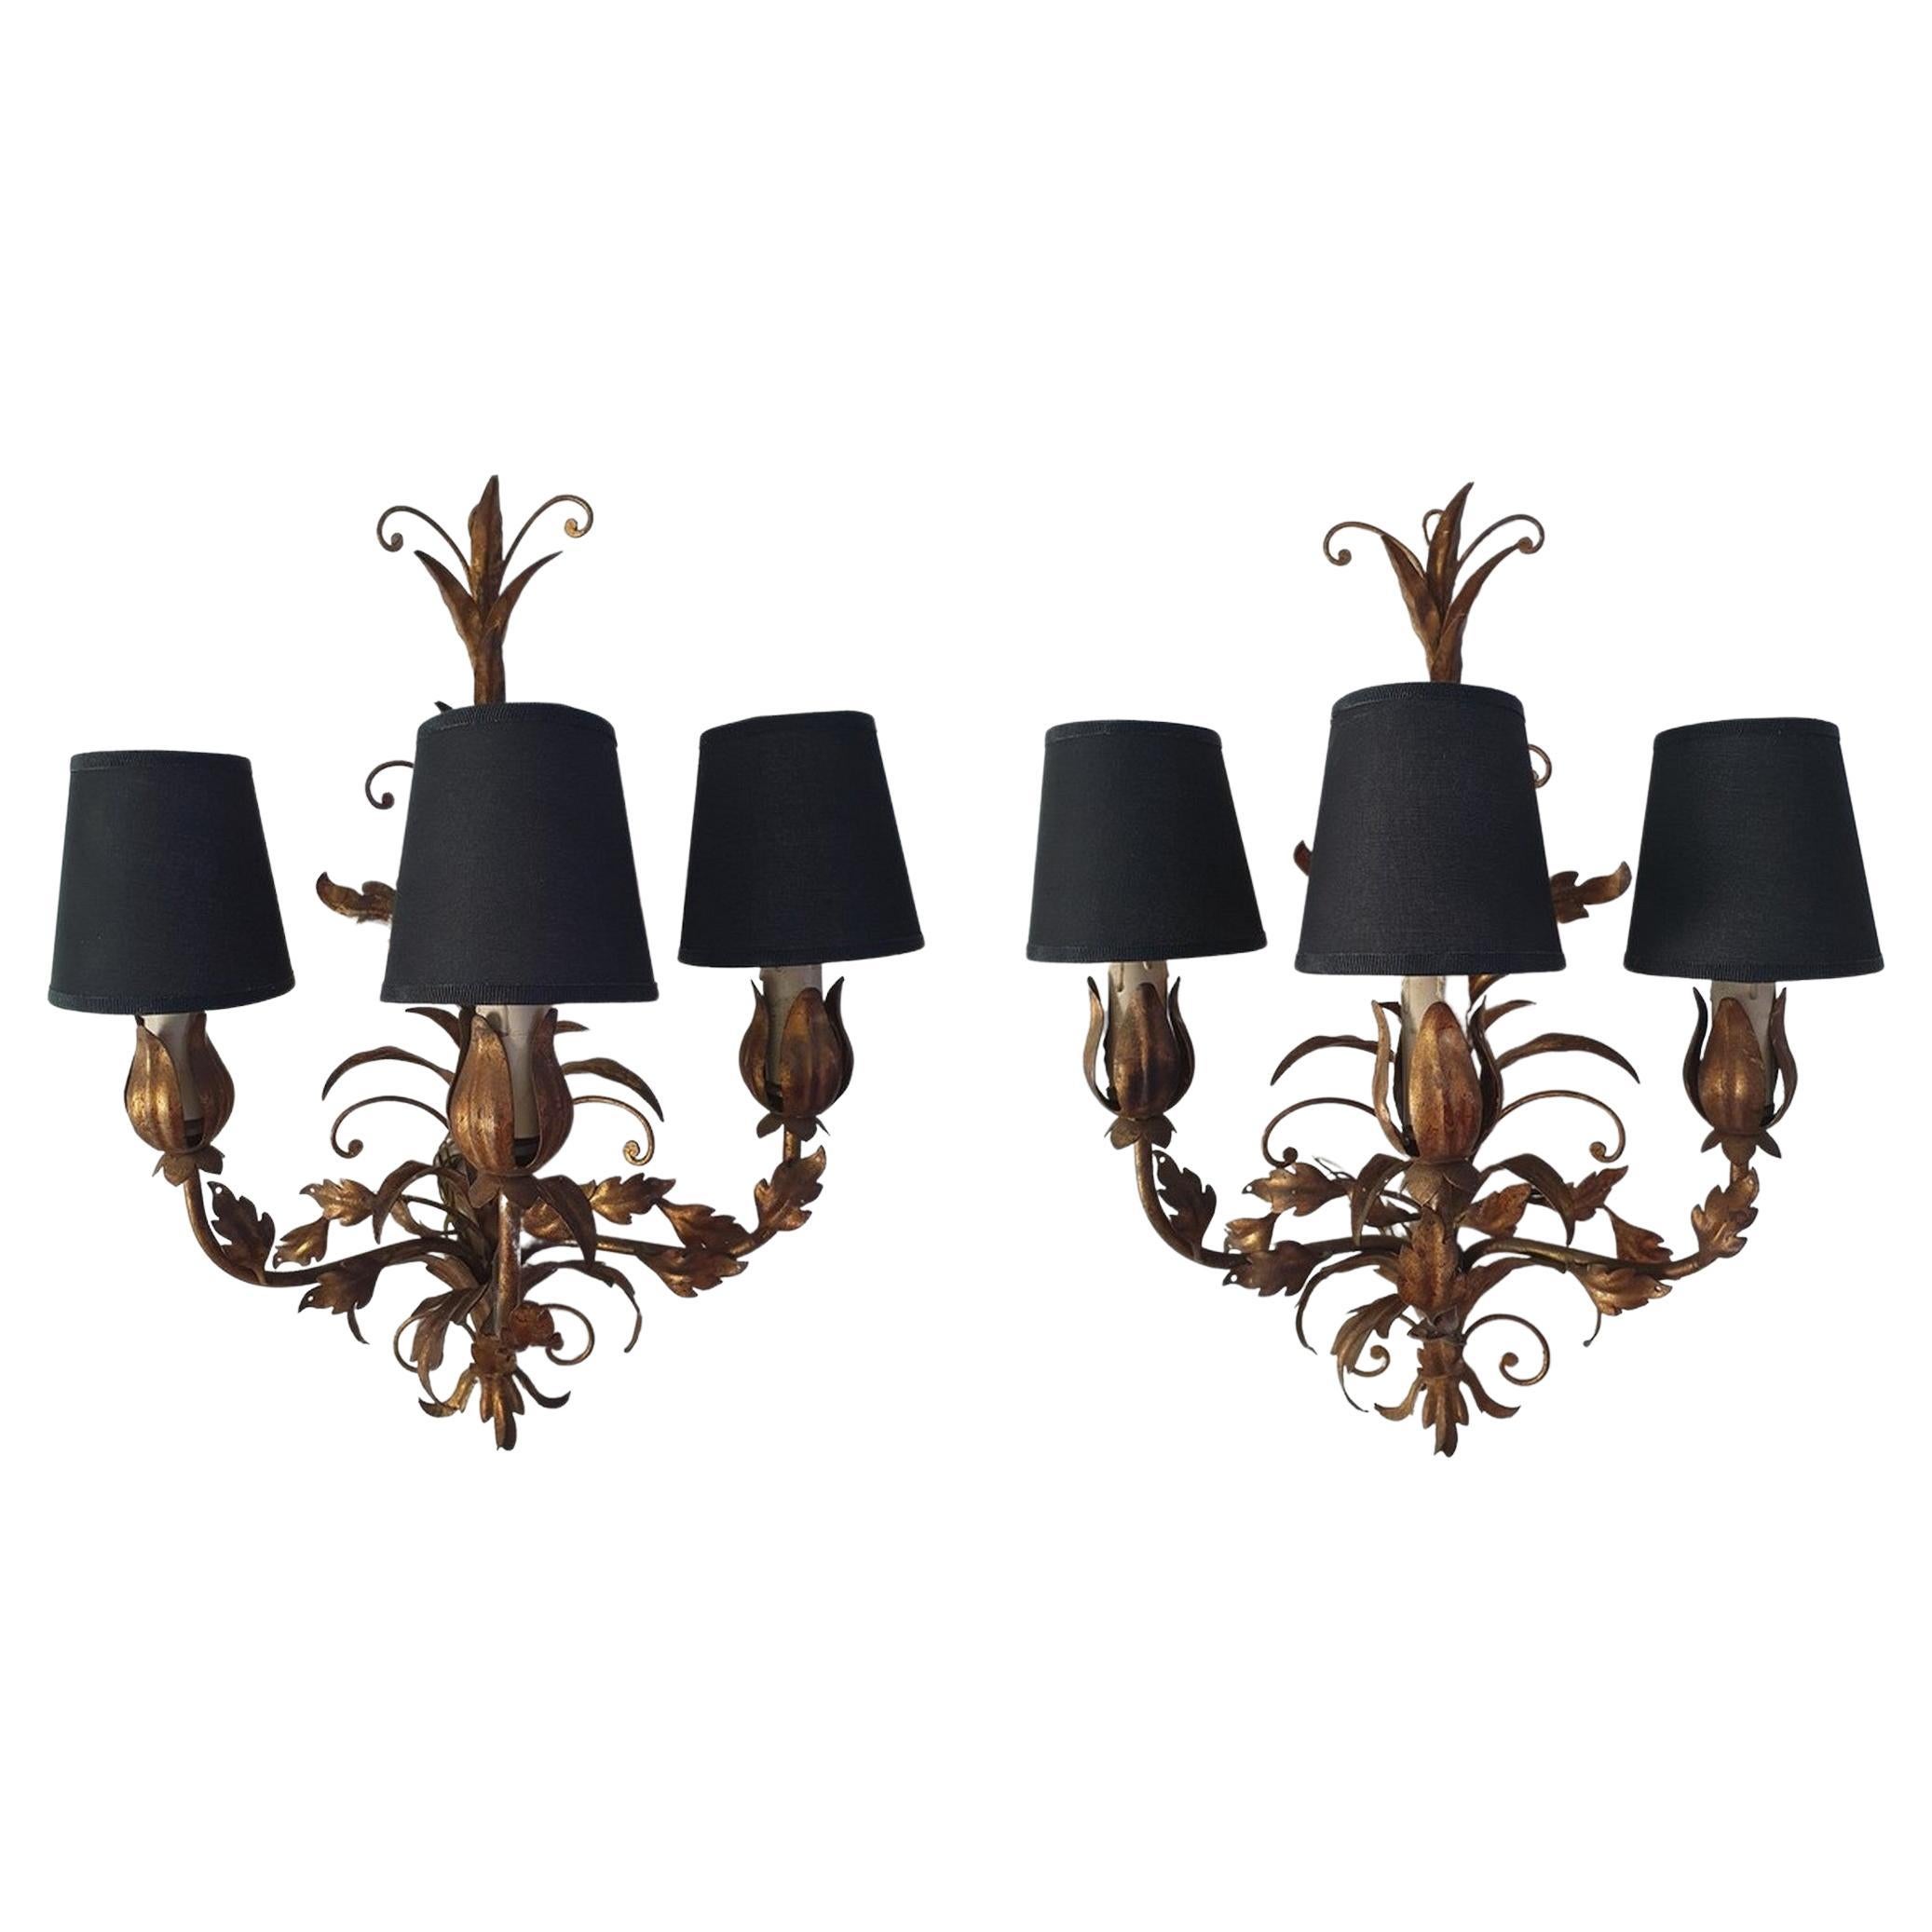 Pair of Venetian Tole Wall Sconces